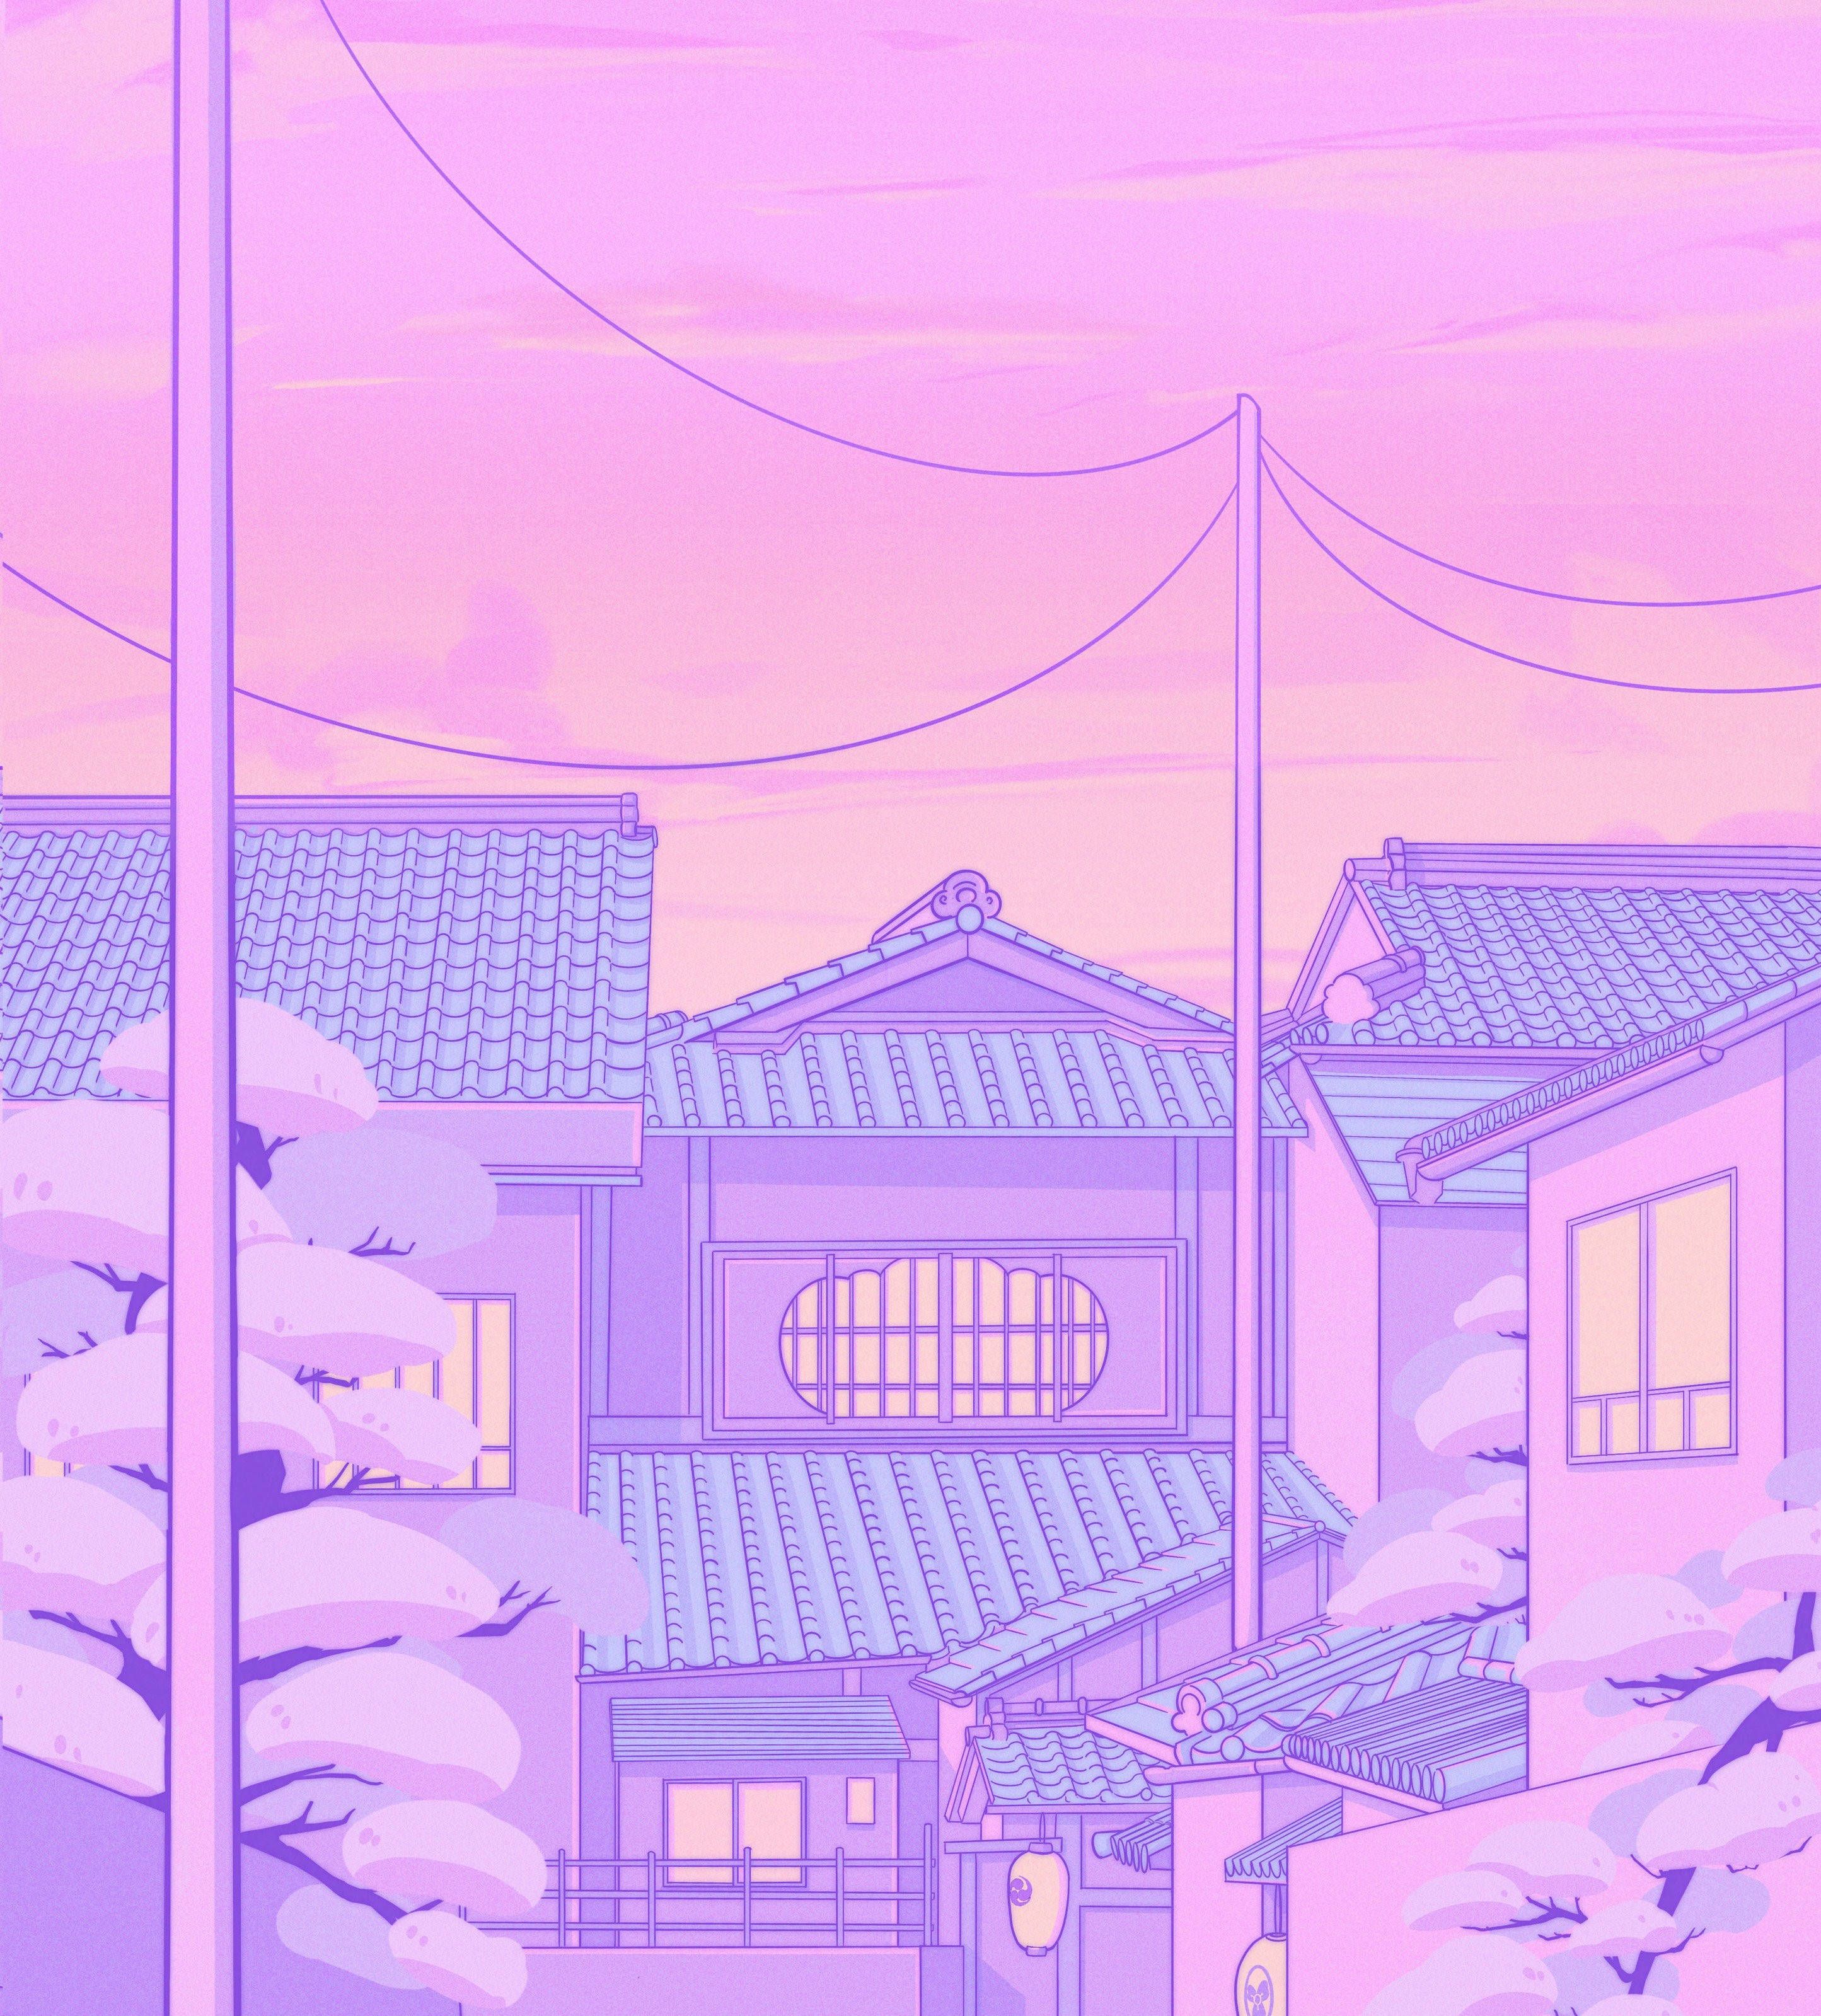 Aesthetic background of a Japanese town with traditional houses - Pastel